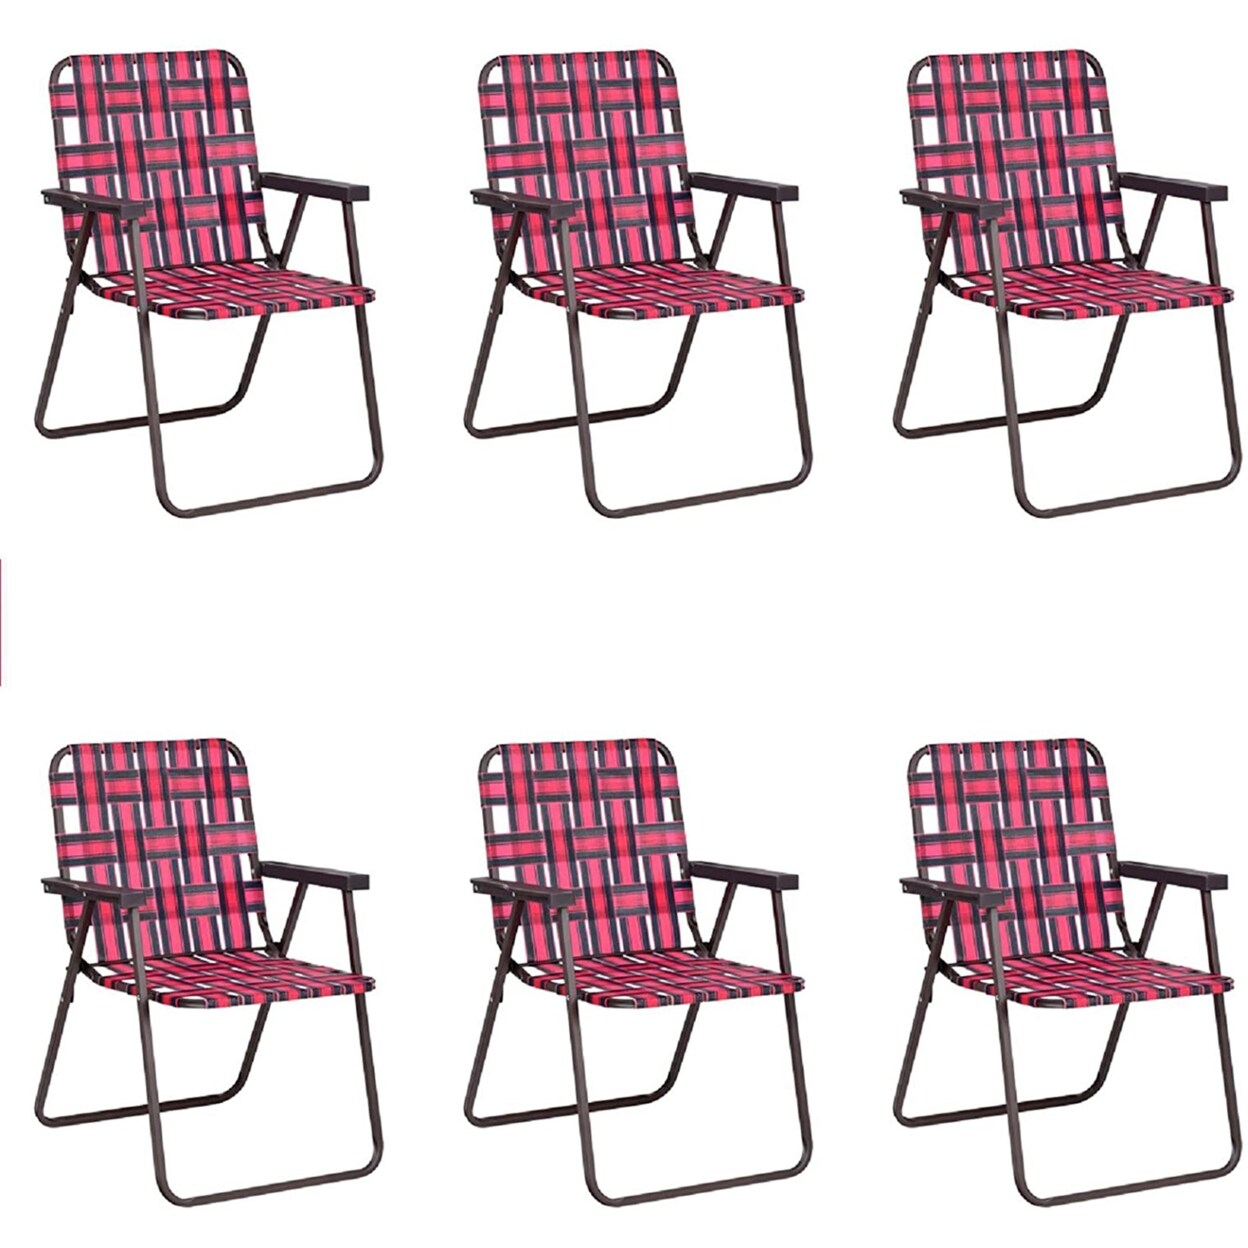 6-Piece Steel Folding Portable Beach Lawn Chair with Webbing Seat, Red